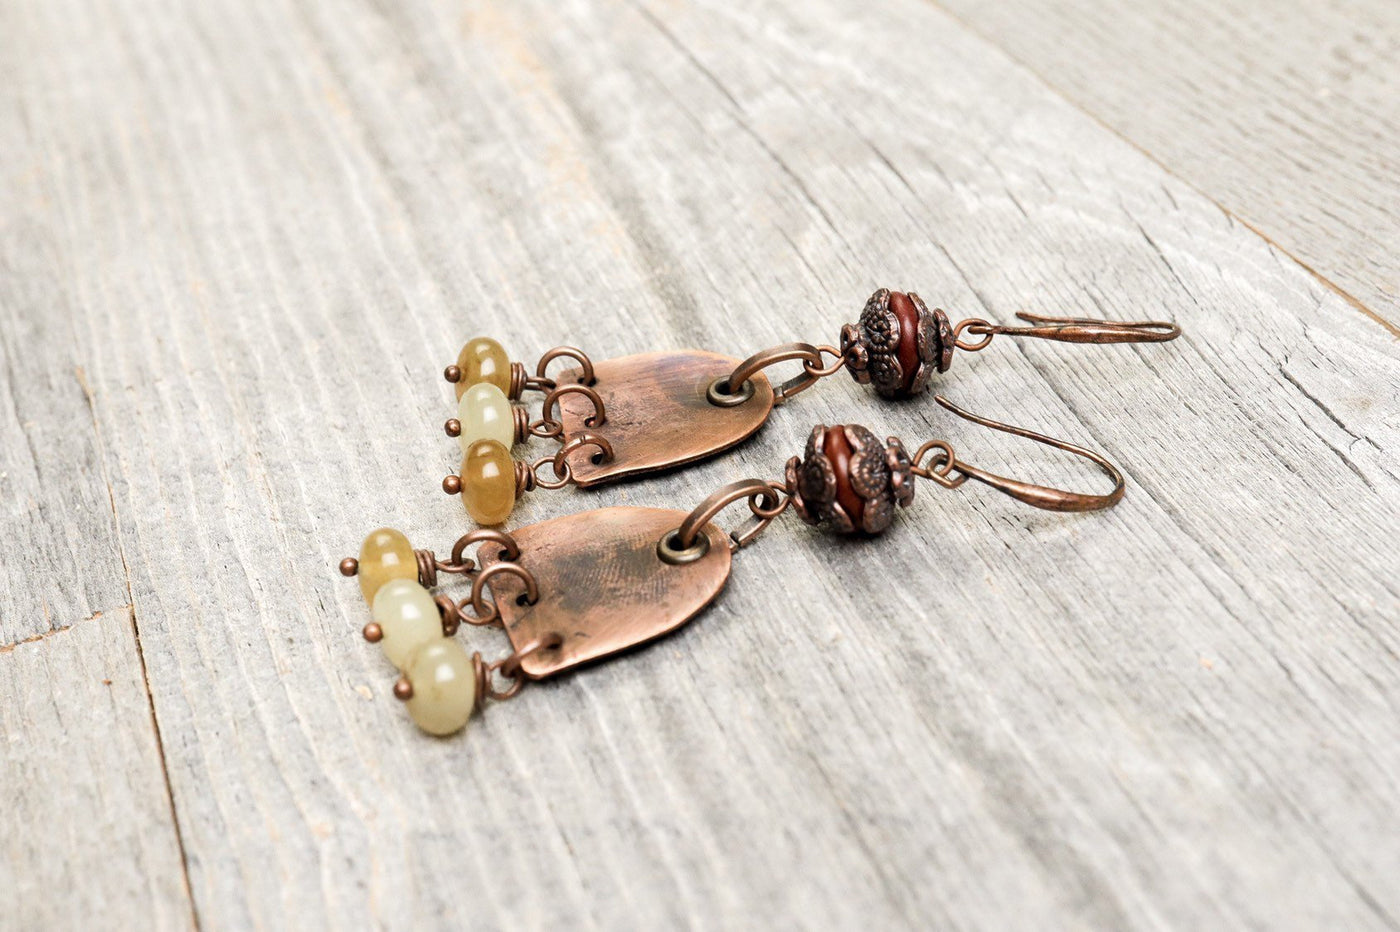 Cloudy Yellow Jade Copper Earrings - Distressed Stone Dangle Antique Boho Gypsy Big Hippie Unique Statement Bohemian Rustic Handmade Jewelry